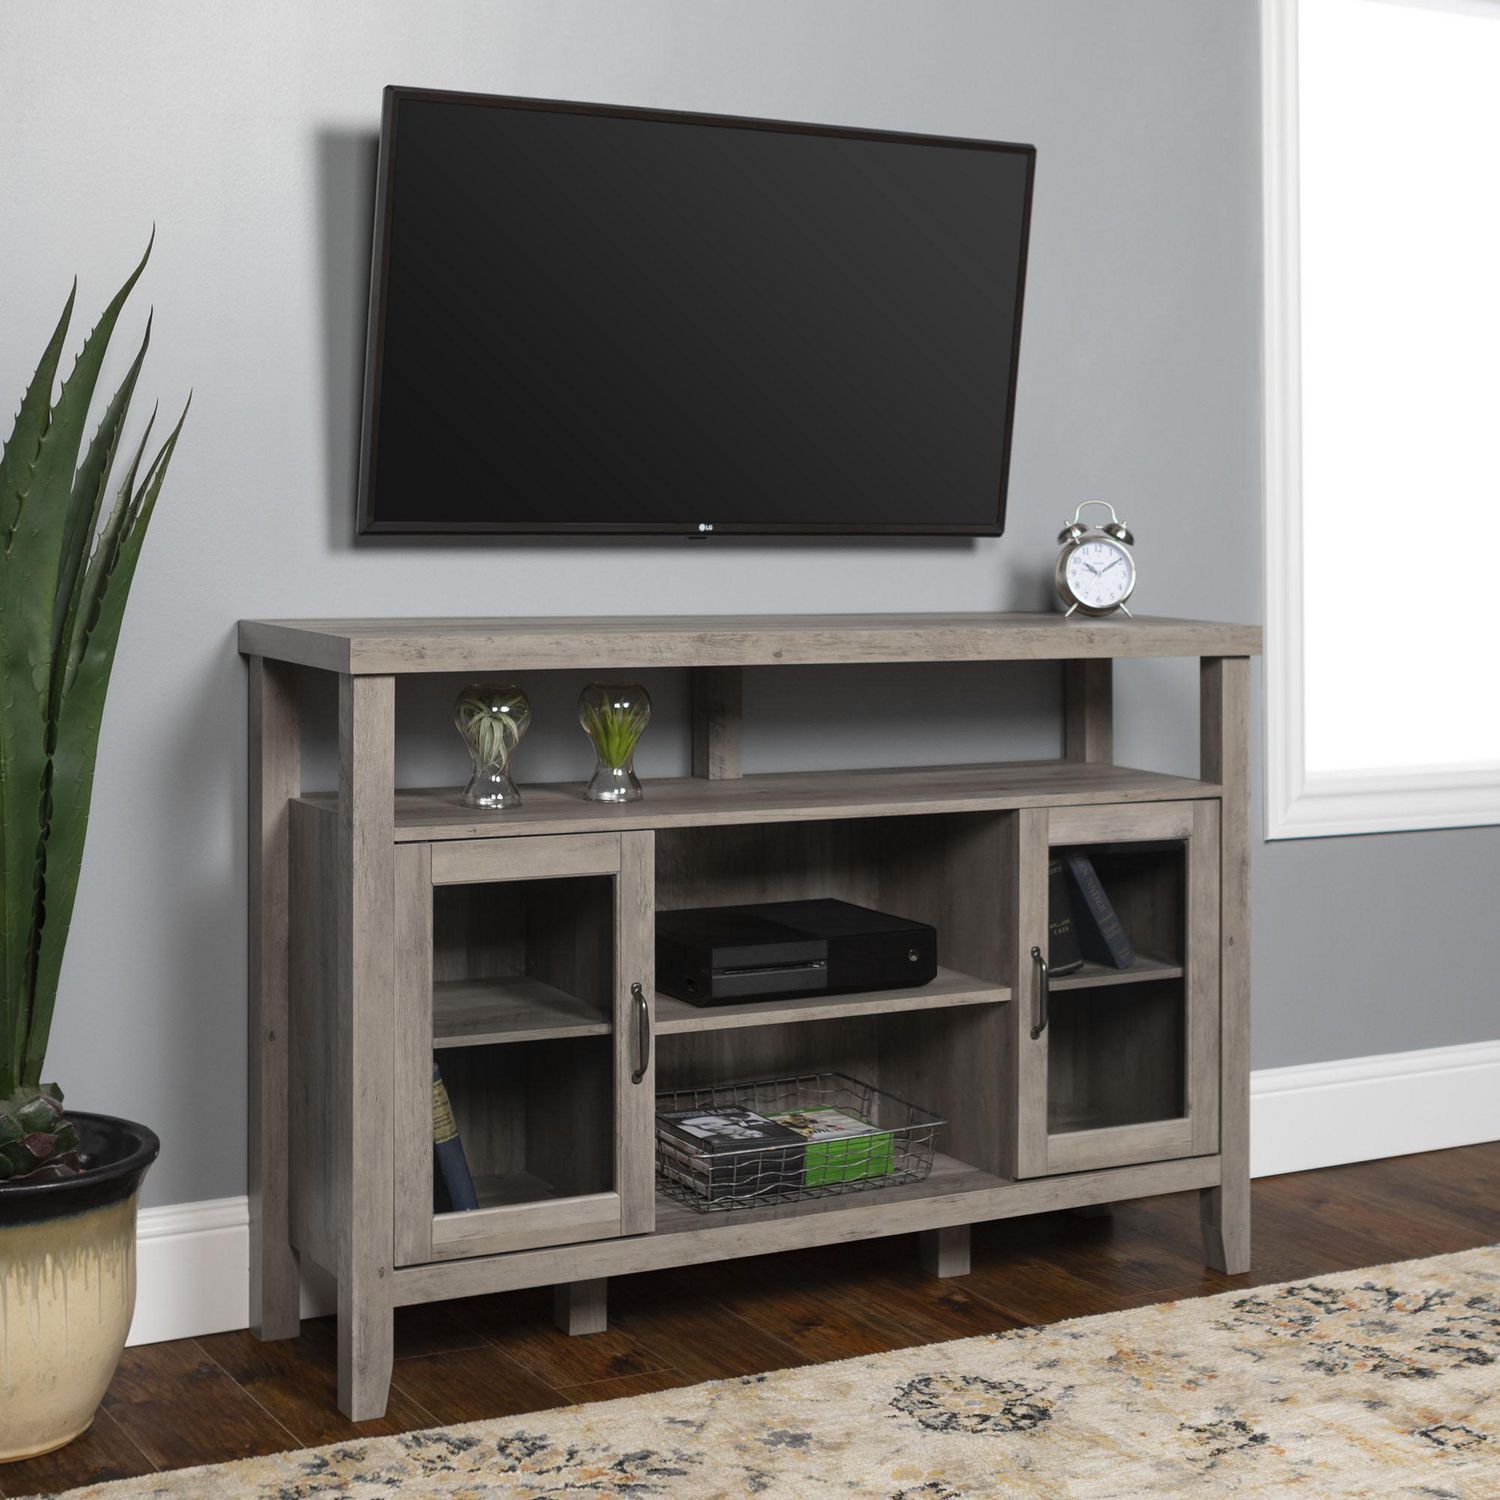 Manor Park Rustic Farmhouse Tv Stand For Tv's Up To 56" – Multiple Within Modern Farmhouse Rustic Tv Stands (View 11 of 20)